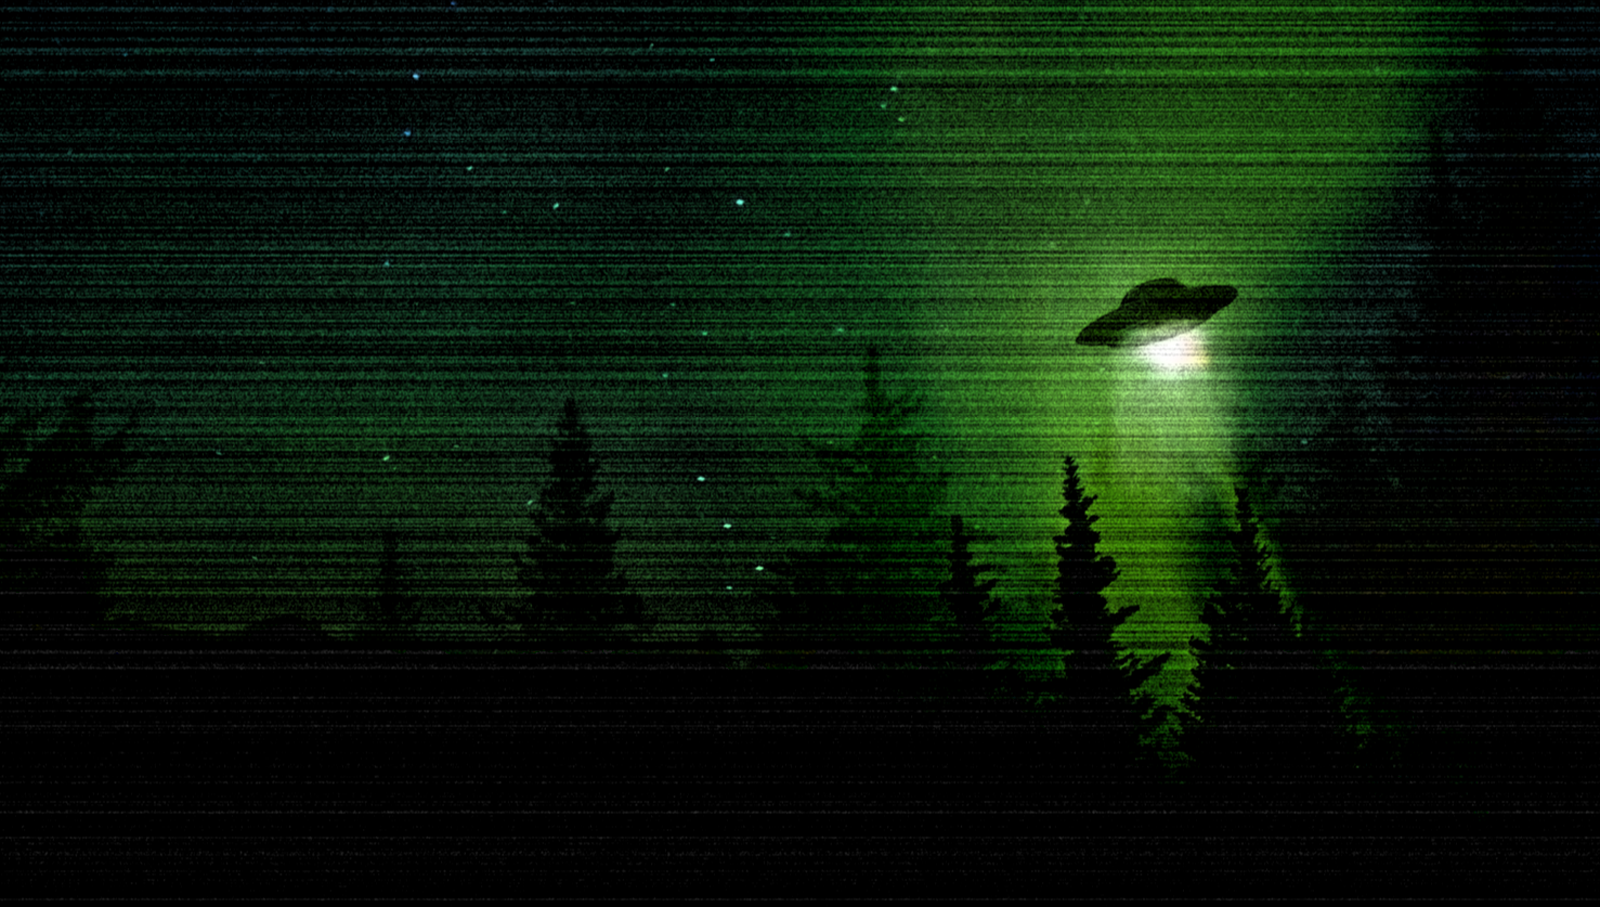 Secret Document Sent To Canadian Prime Minister About UFO Shot Down In February Revealed